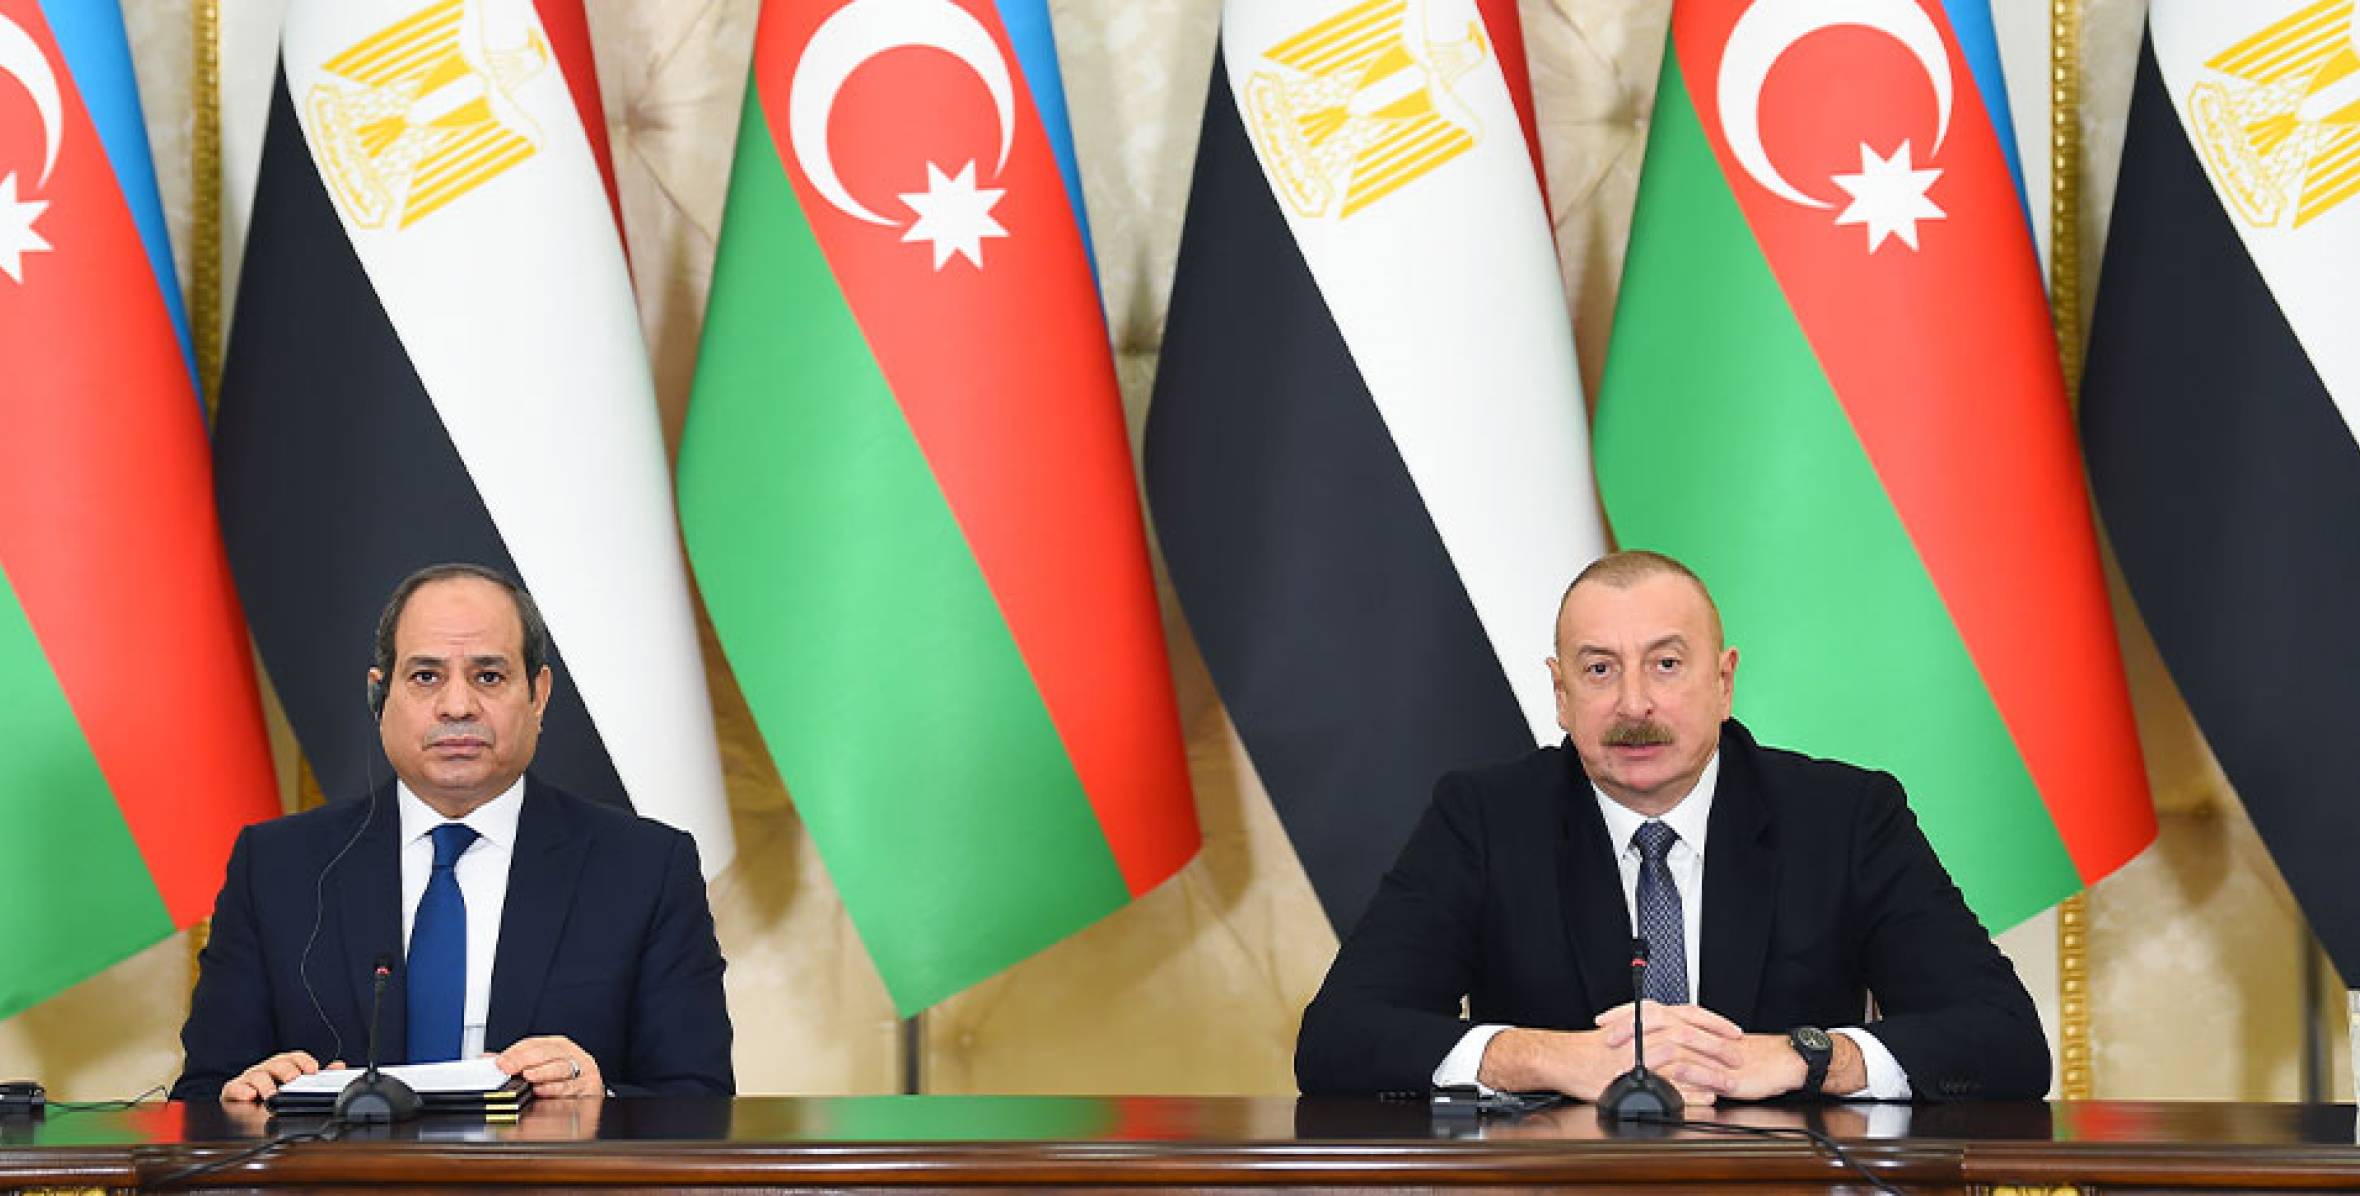 Presidents of Azerbaijan and Egypt made press statements